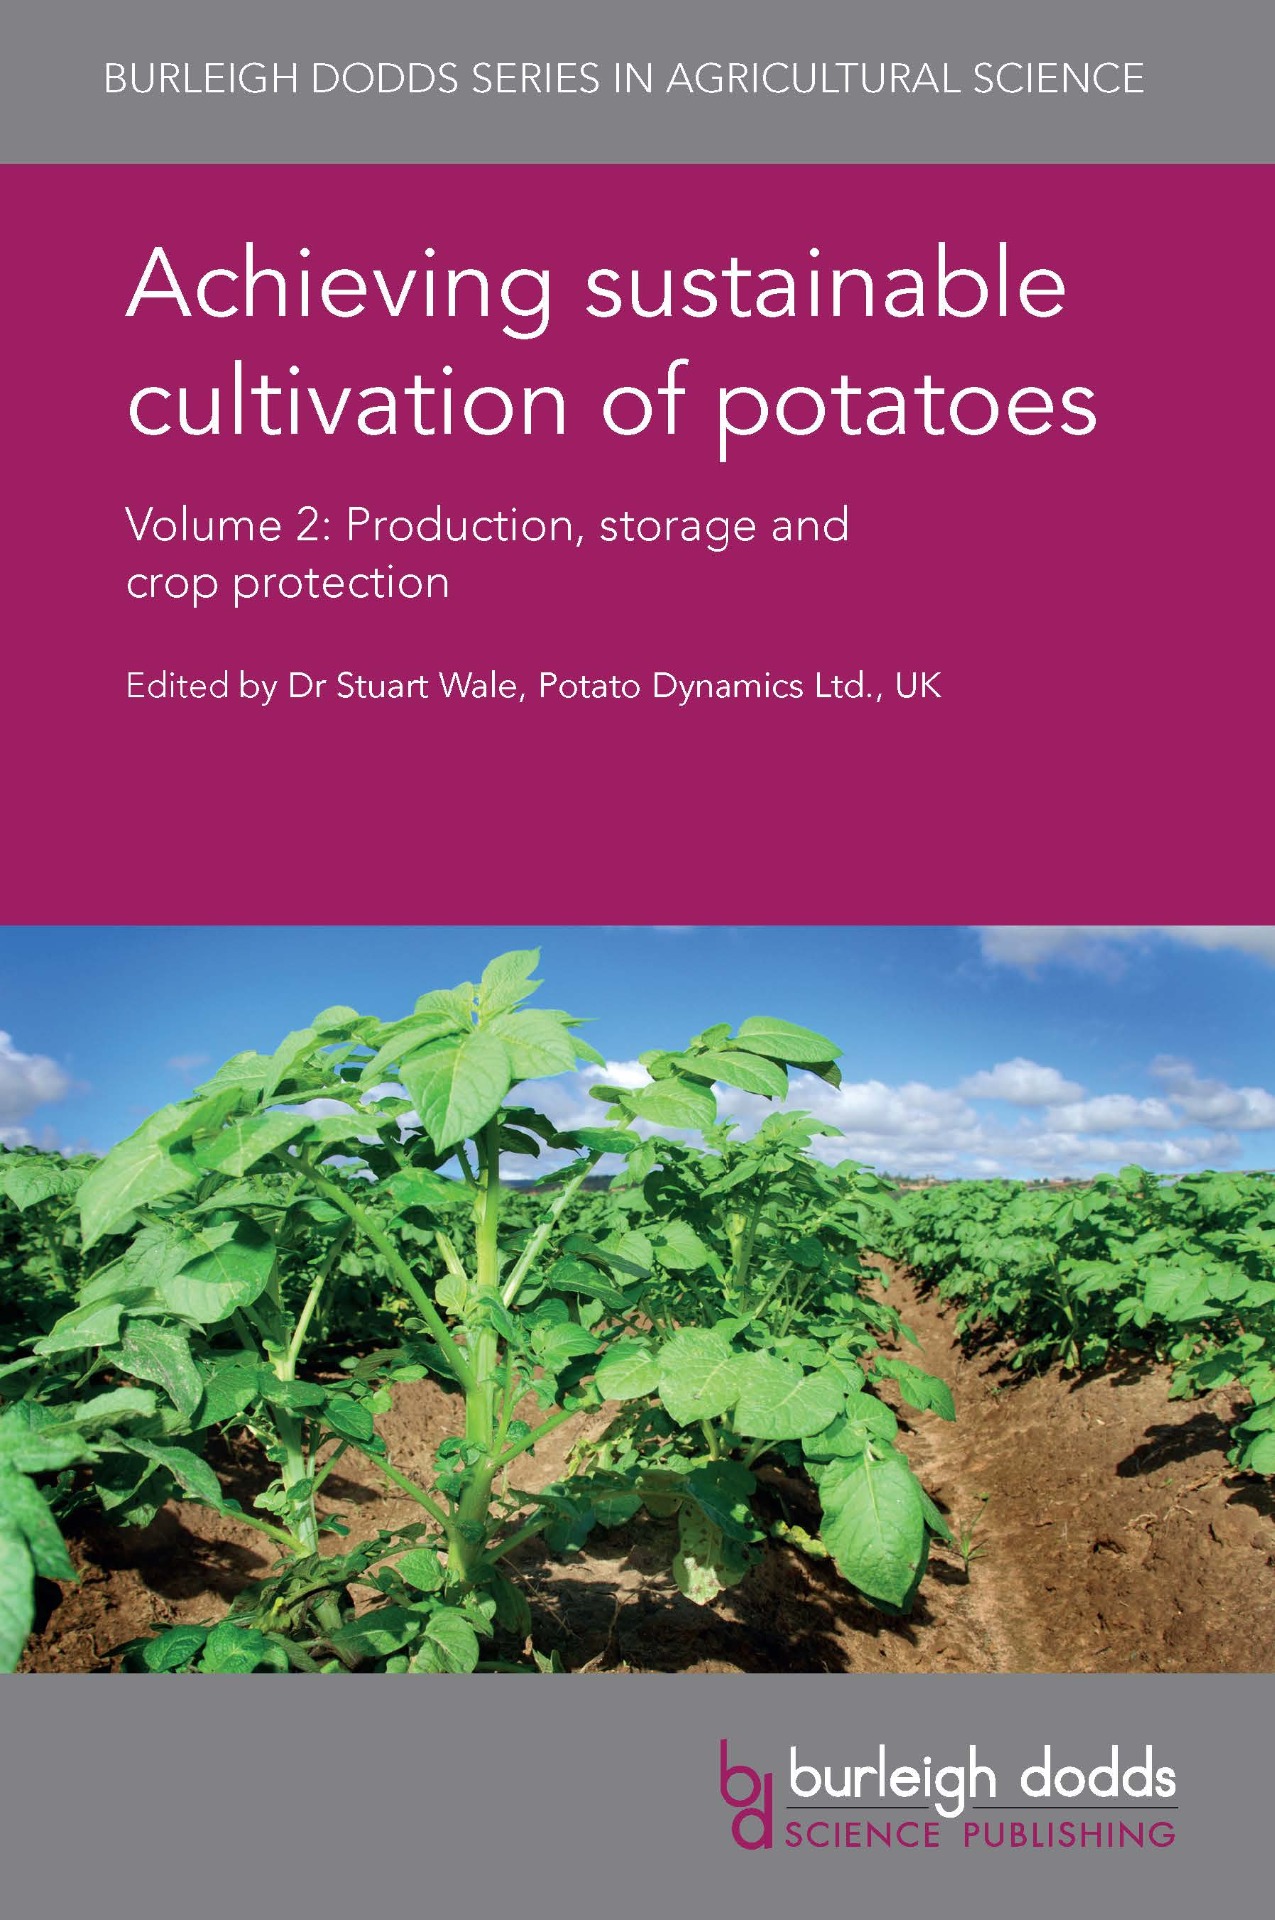 Achieving sustainable cultivation of potatoes Volume 2